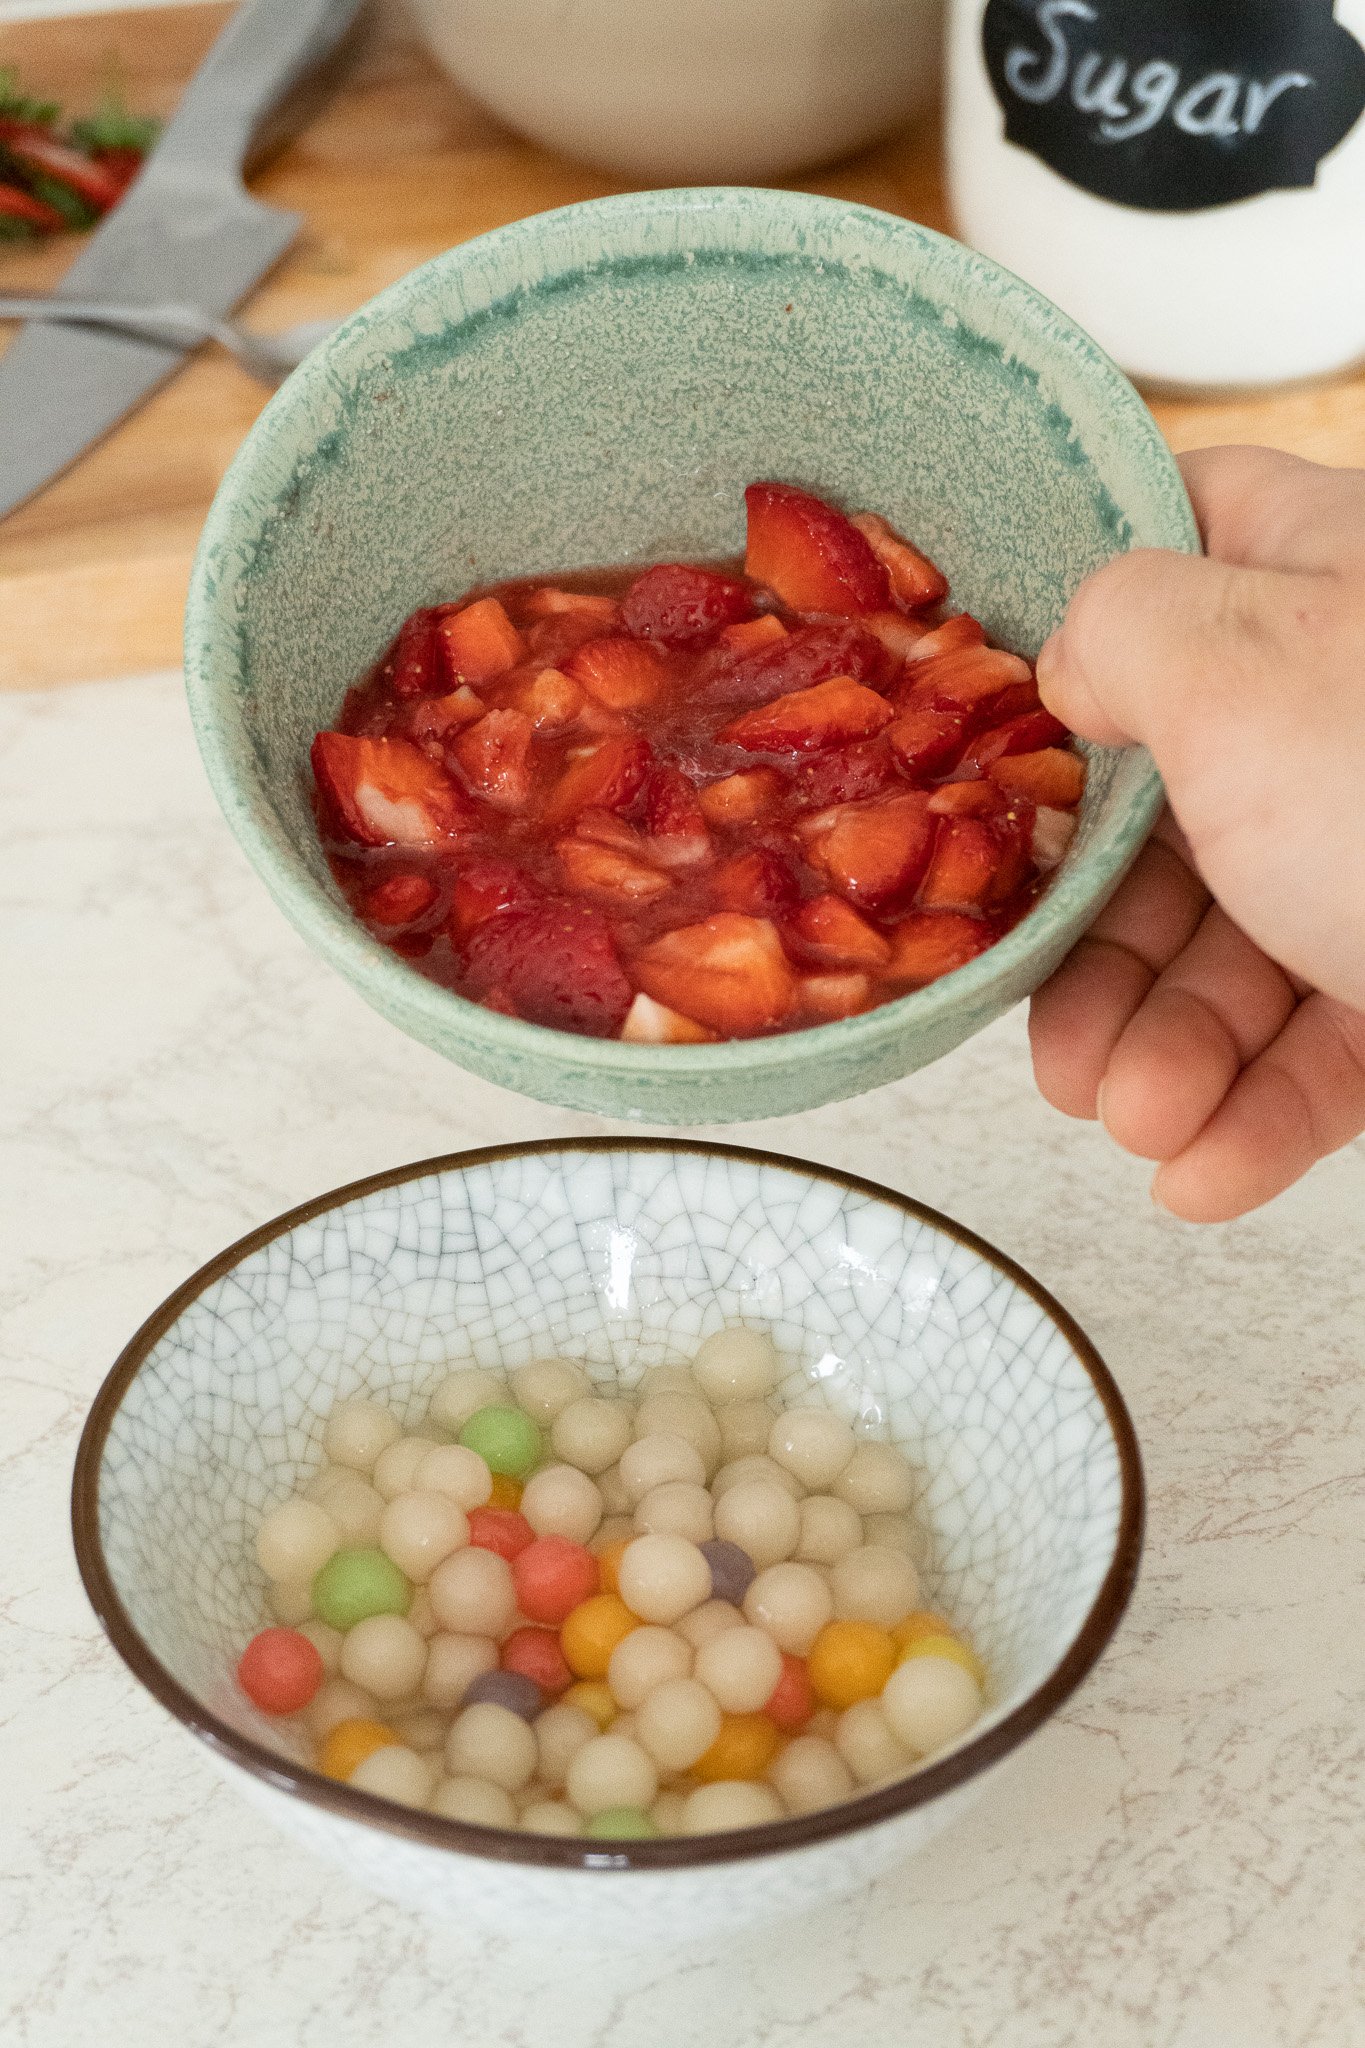 crushed strawberries in a bowl with sugar ready for strawberry milk boba drink 